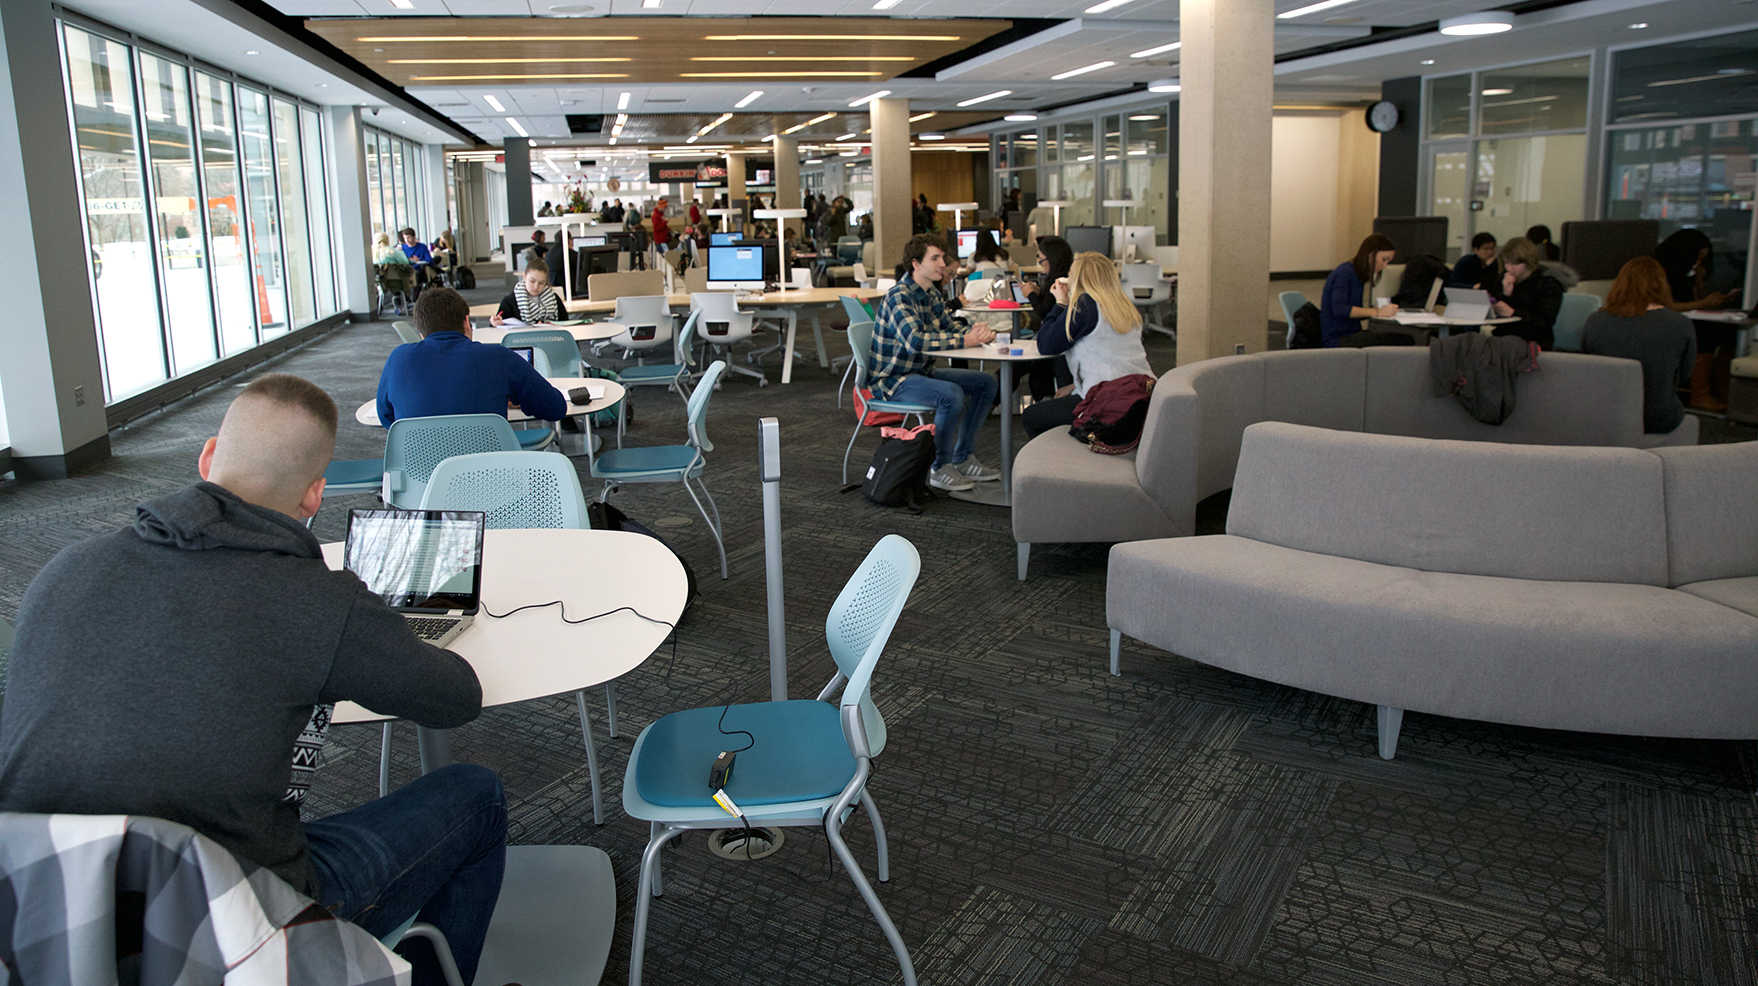 The Adele Coryell Hall Learning Commons are a popular study space on Nebraska's City Campus.